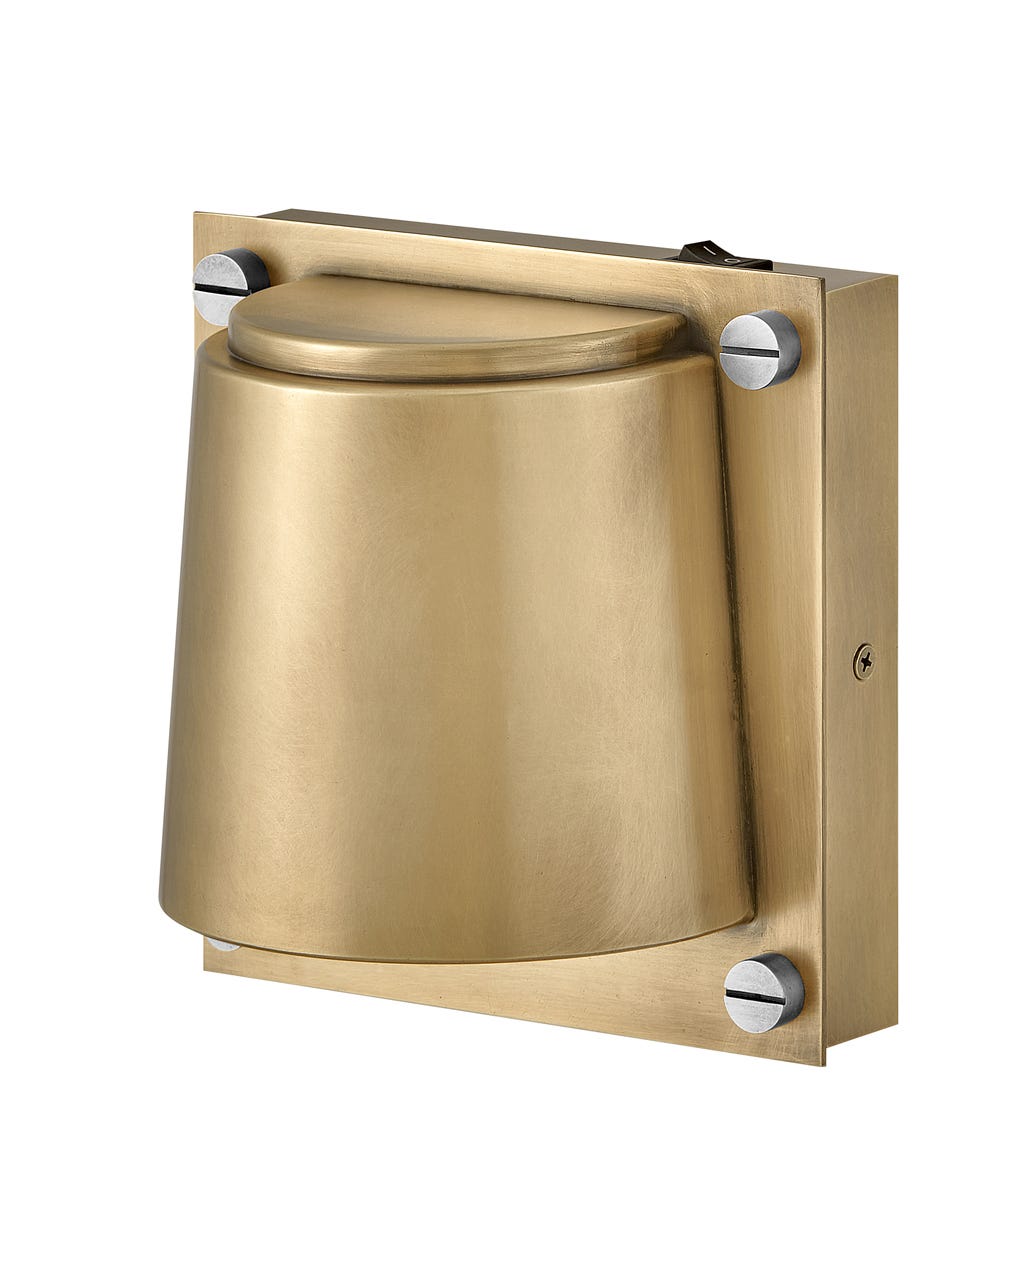 Hinkley Scout Sconce